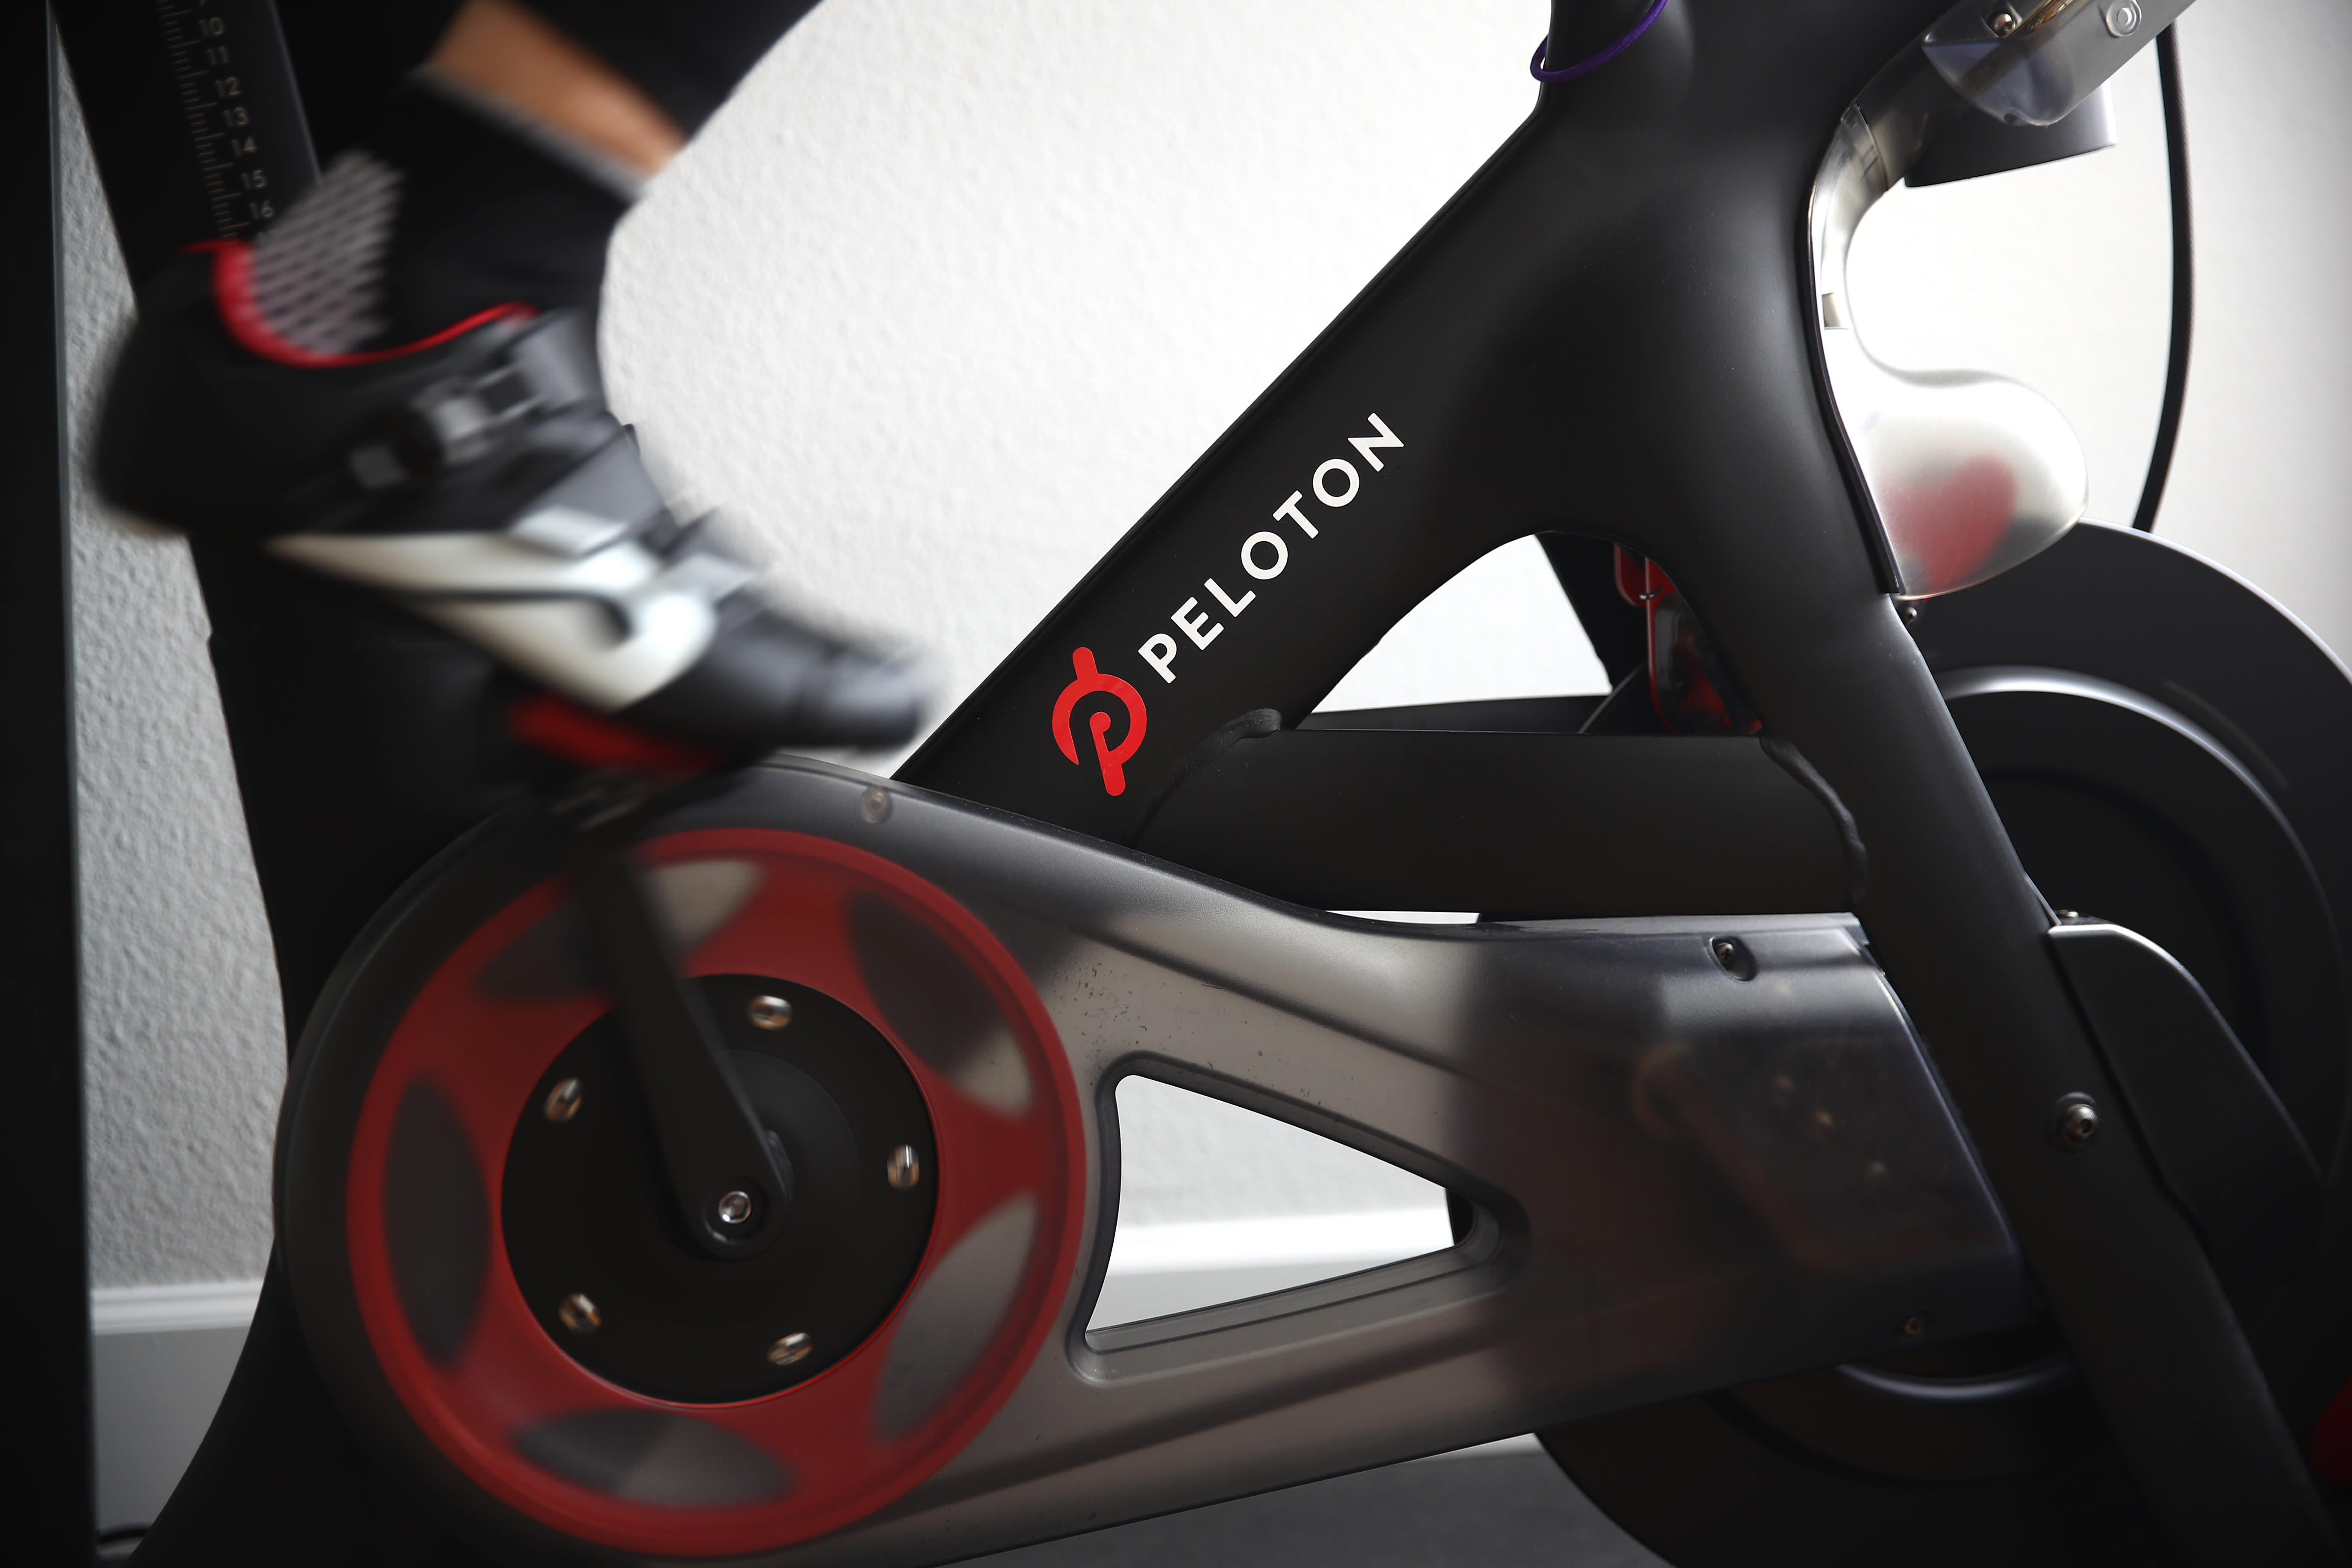 Peloton files to sell  billion in stock offering, shares drop